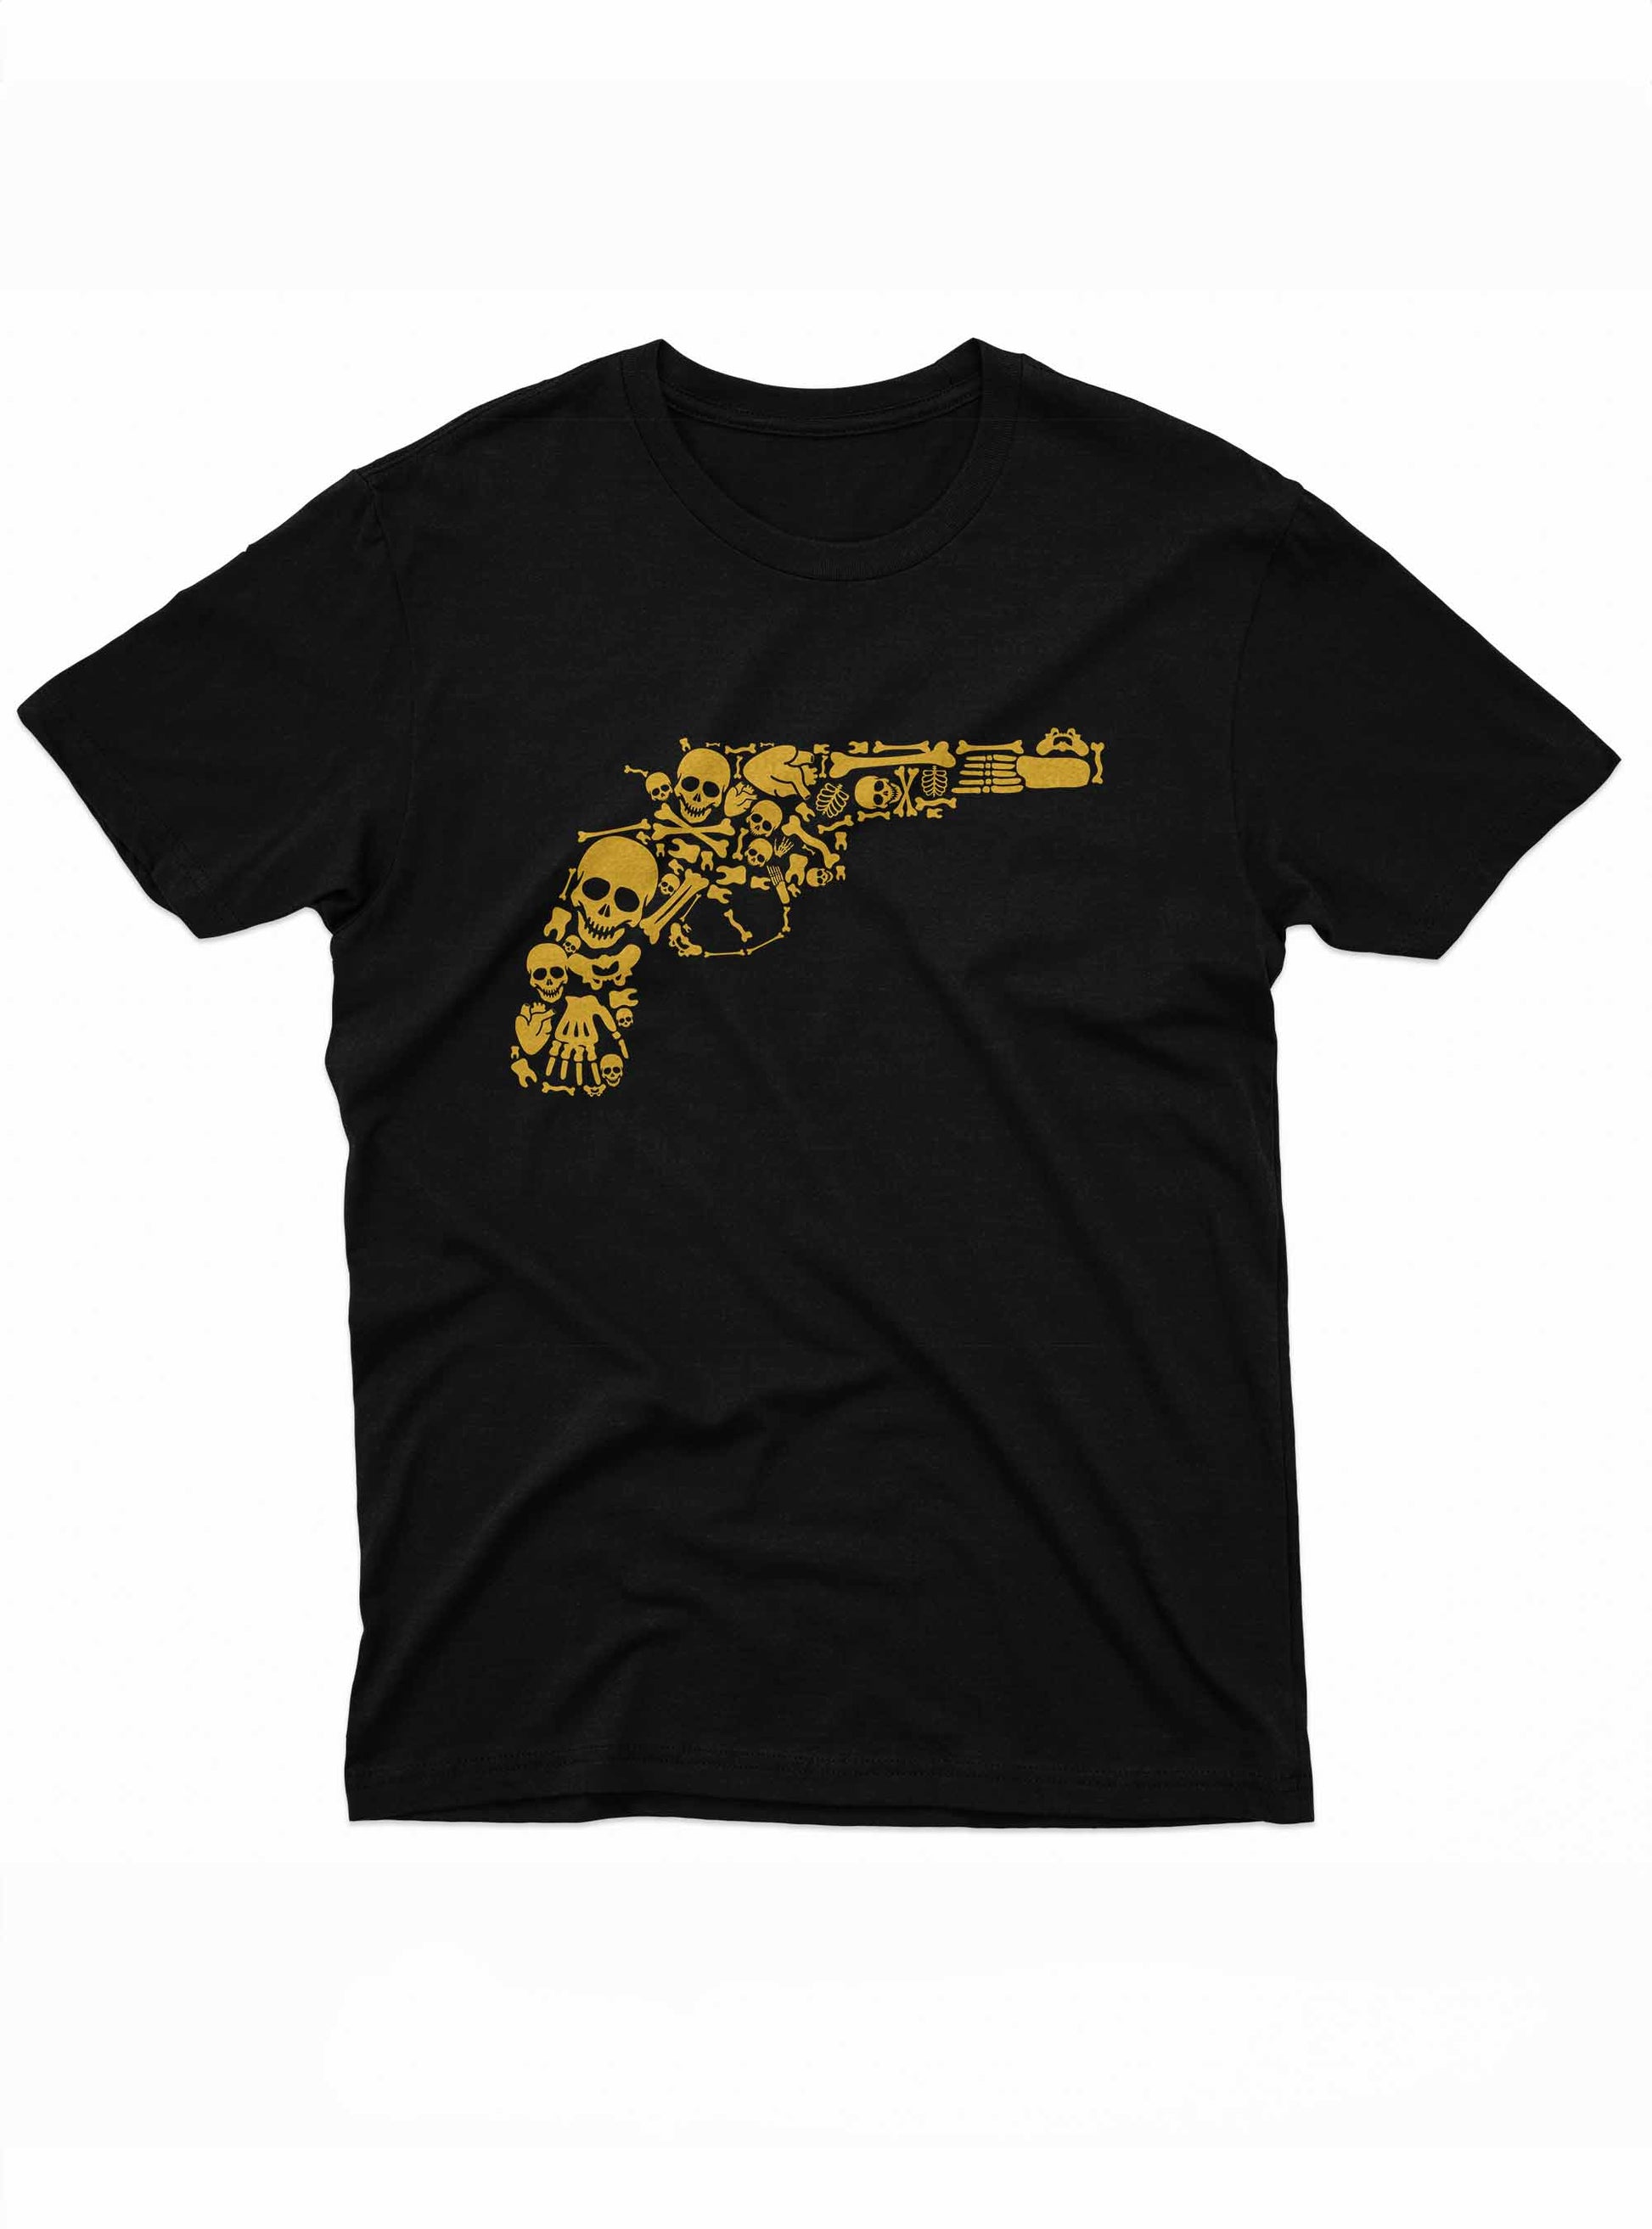 An illustration depicting a revolver made entirely from skulls, bones, and skeletons. The gun design uses shades of yellow and orange on a black background, combining dark and edgy imagery with creative artistry.